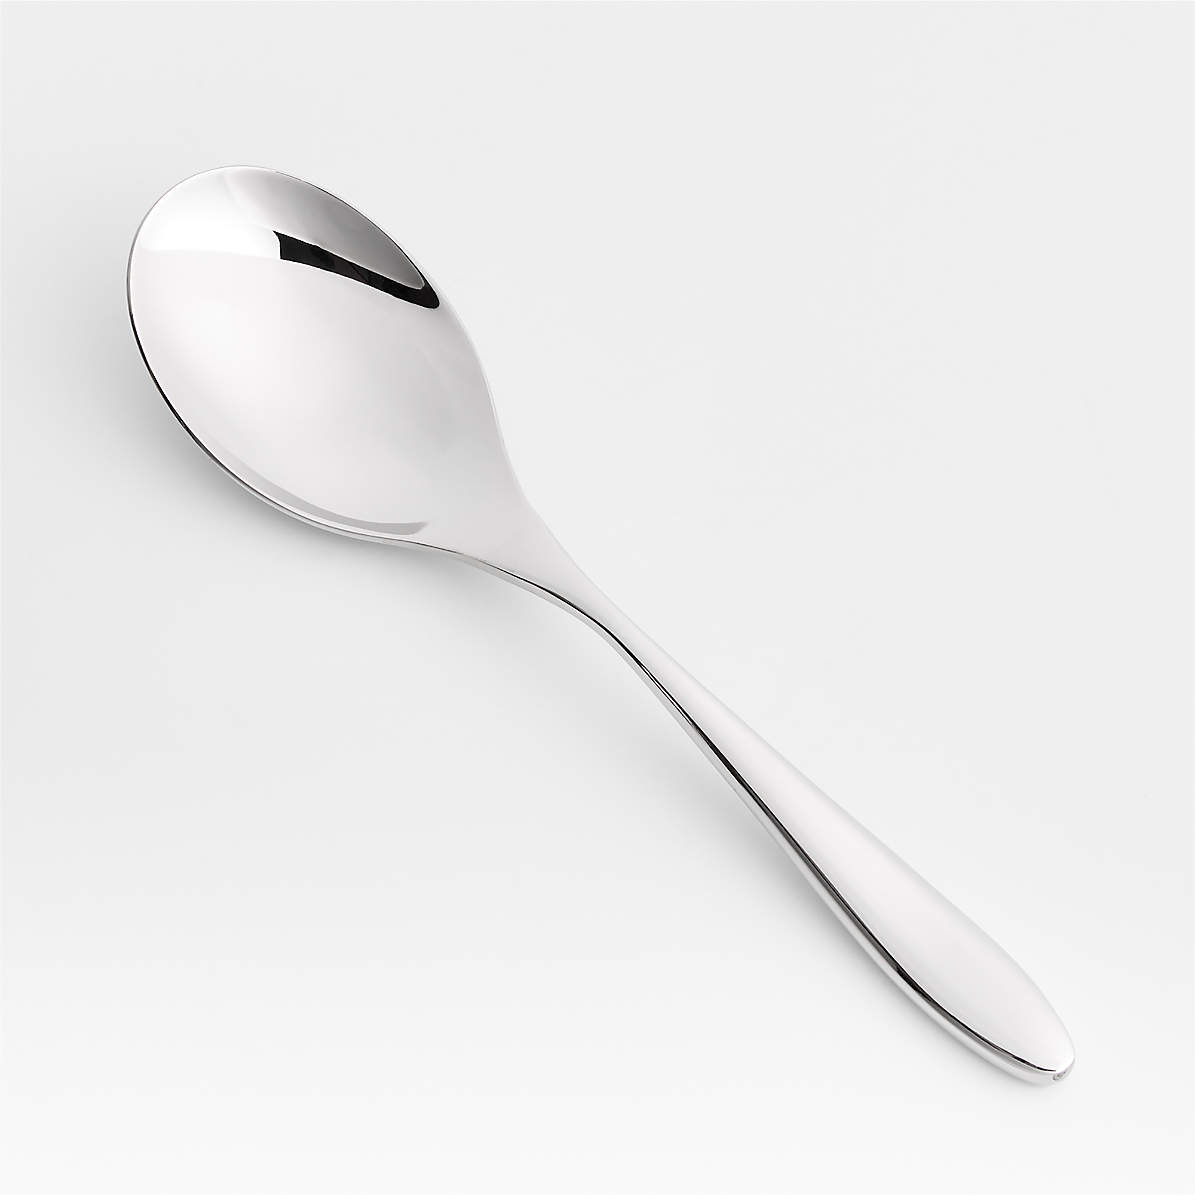  KitchenAid Premium Stainless Steel Slotted Spoon, Large Serving  Spoon: Home & Kitchen